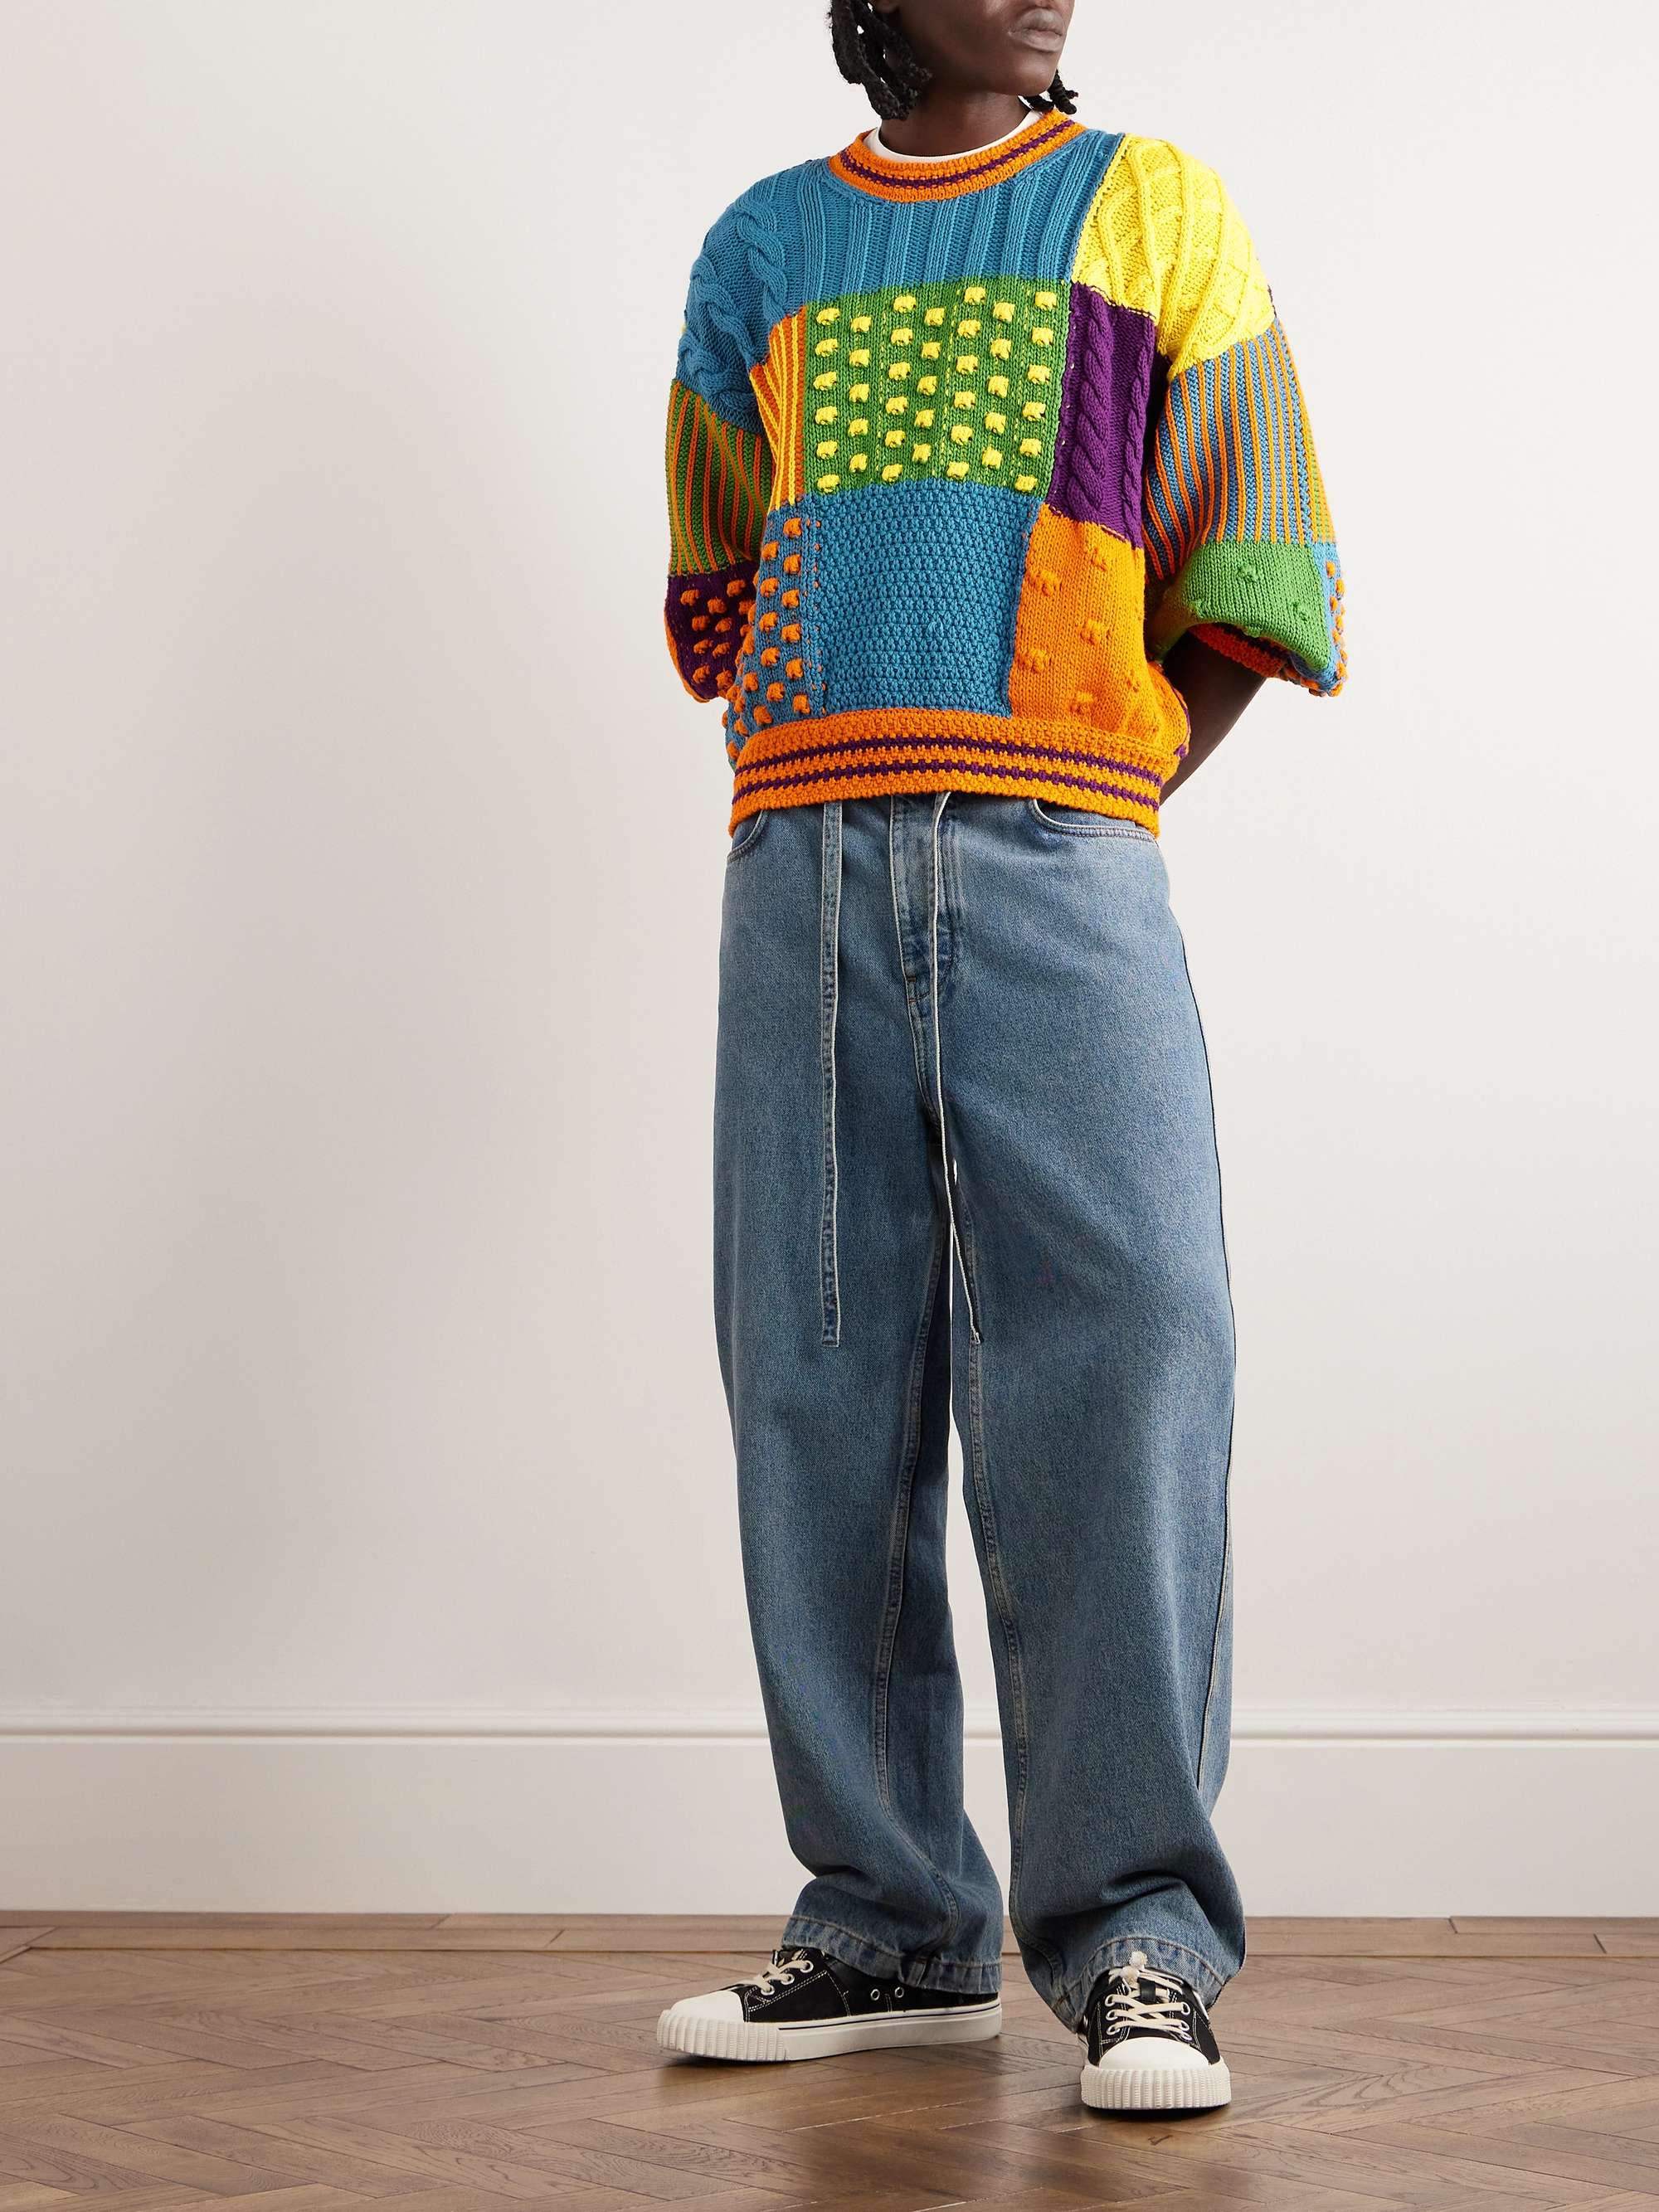 KENZO Psychedelic Cable-Knit Cotton Sweater for Men | MR PORTER